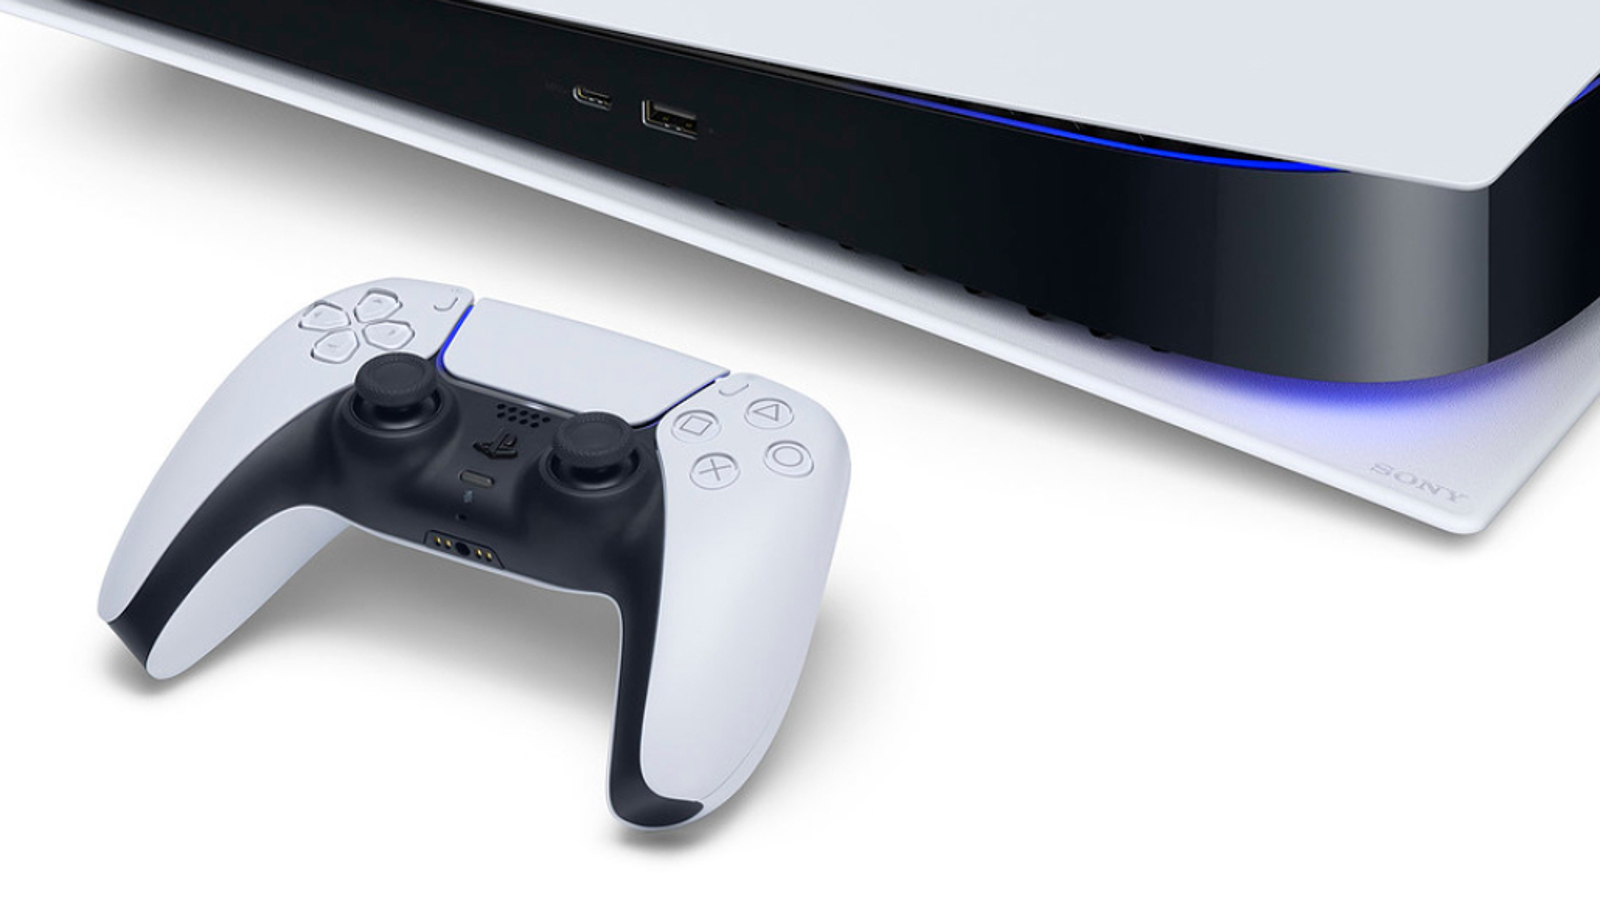 Sony earnings report Q1 2023: PlayStation business boosts sales